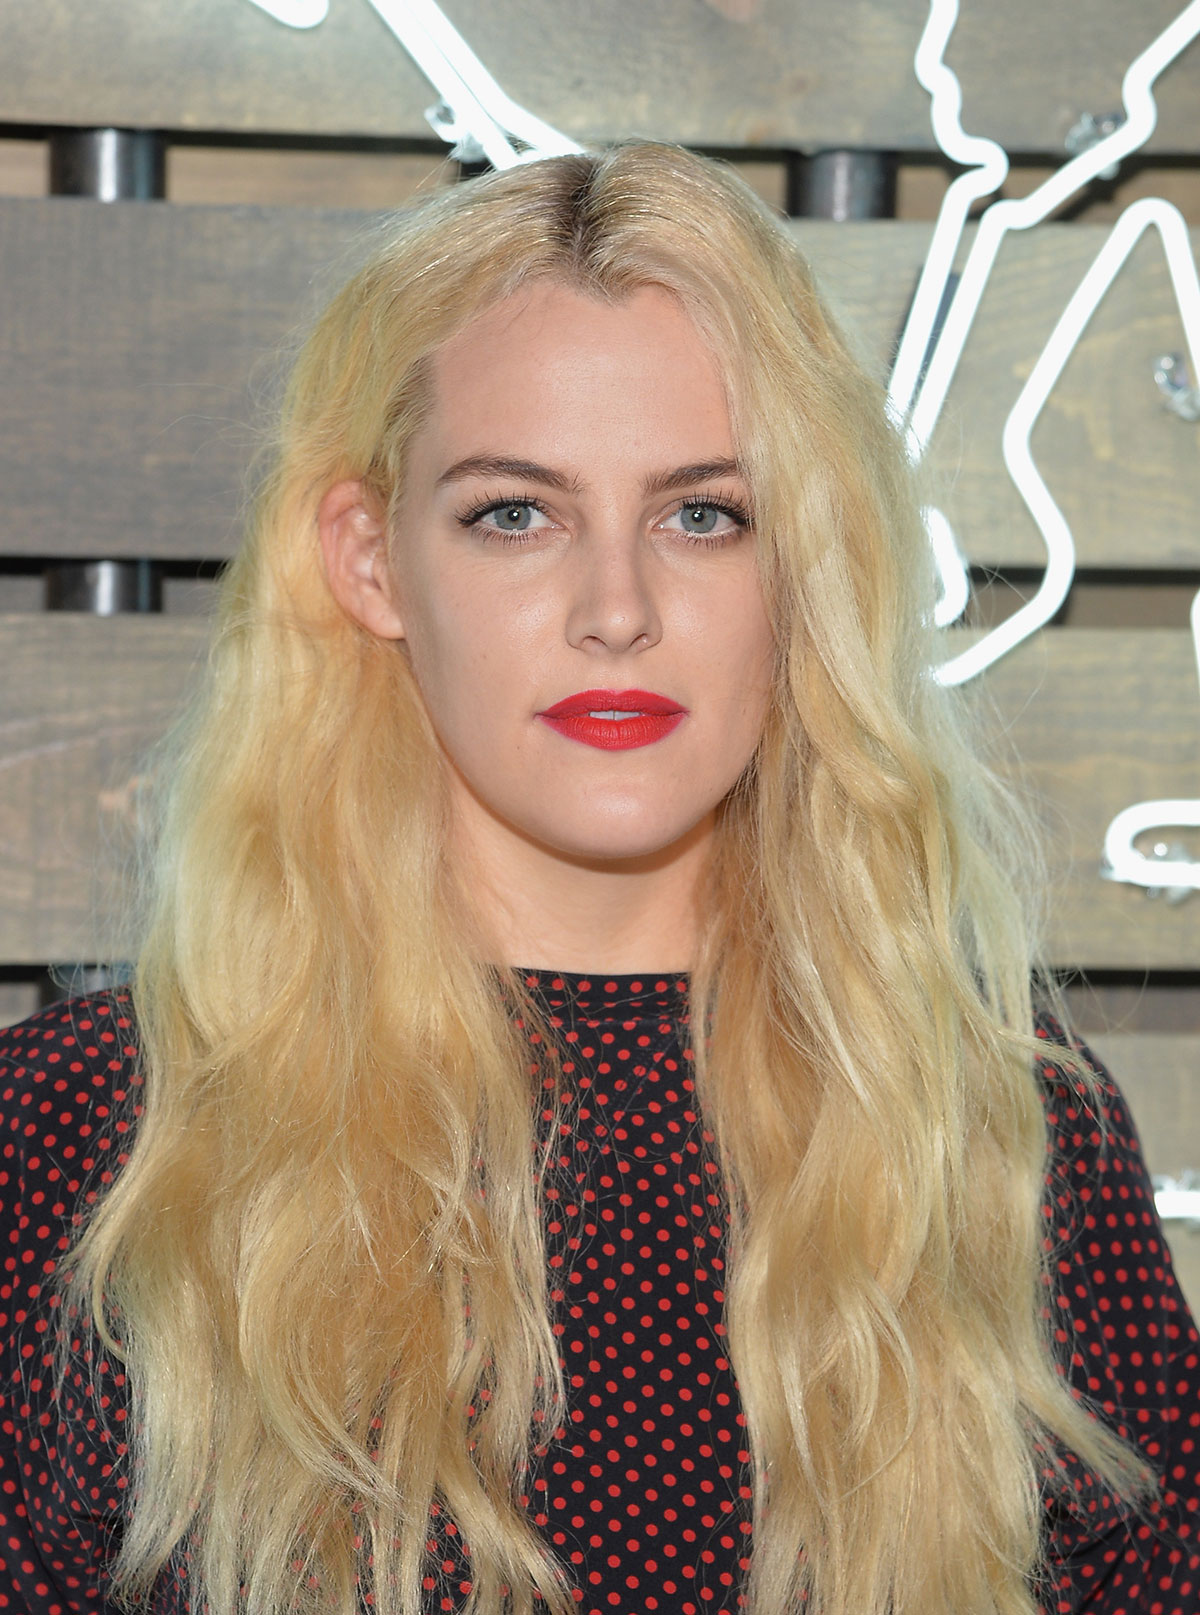 Riley Keough attends 2014 Coach Summer Party